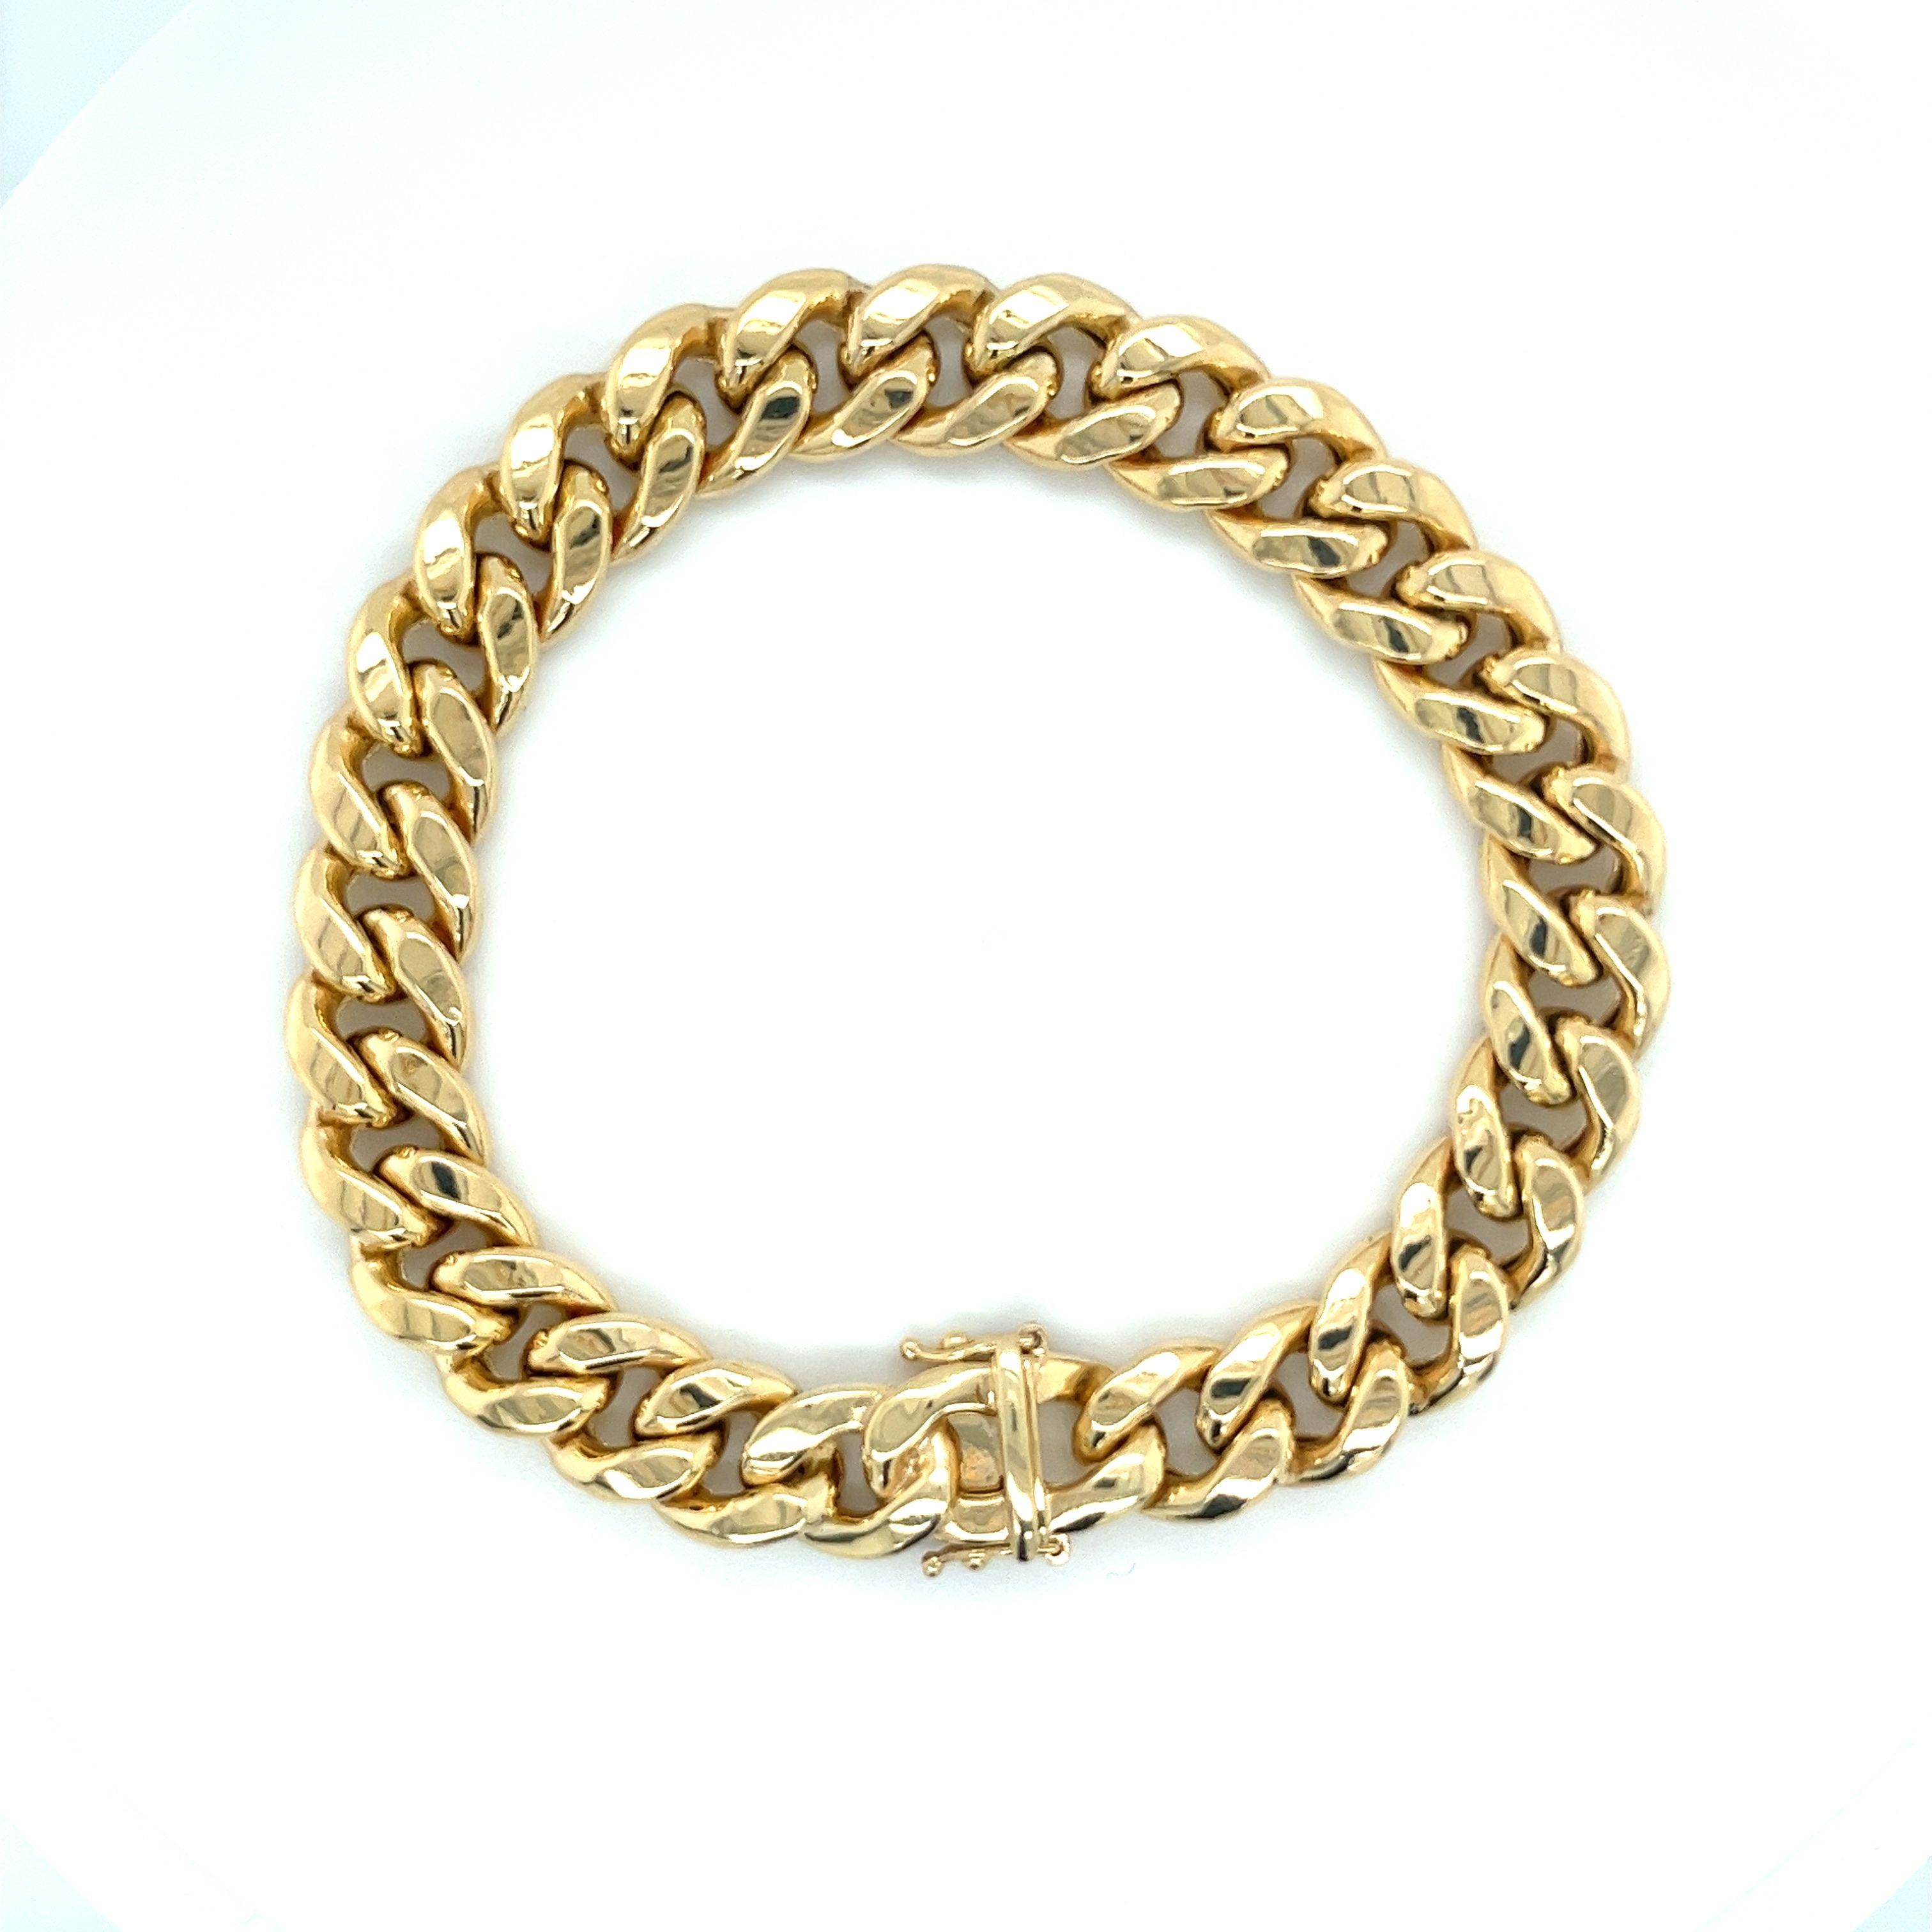 Modern 14K Yellow Gold Flat Miami Cuban Link Chain Bracelet with Box Closure For Sale